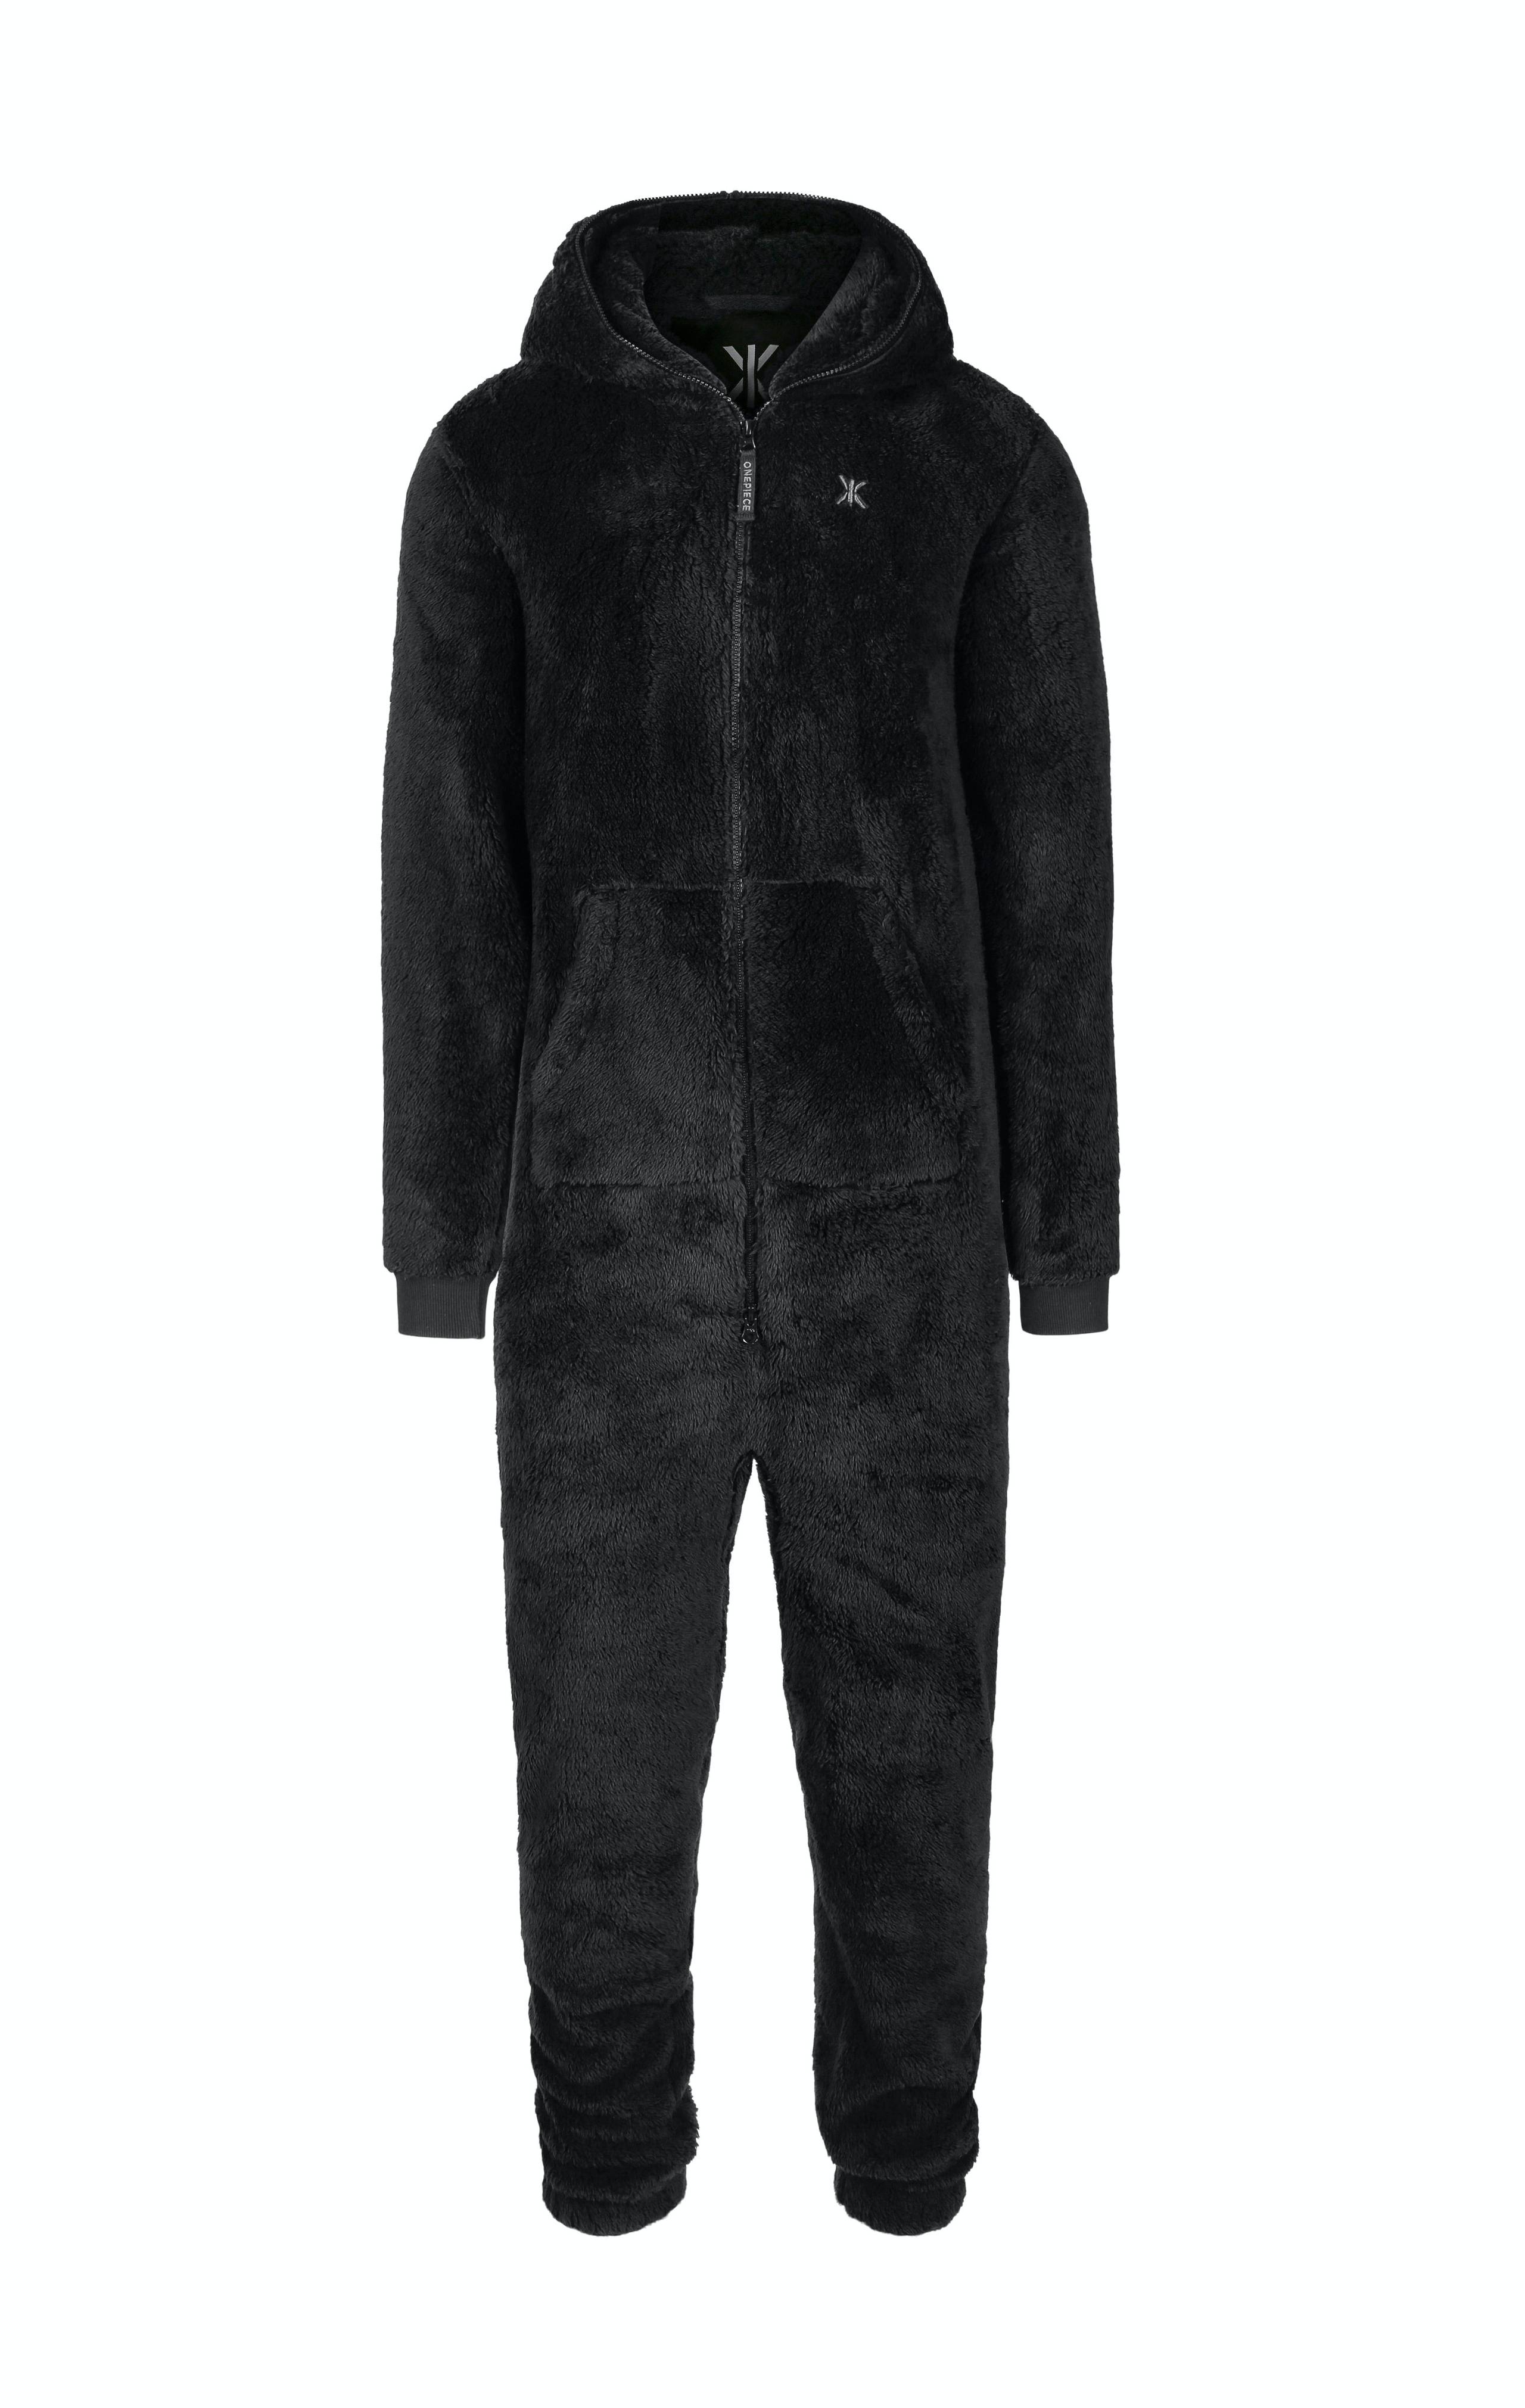 Onepiece The New Puppy Jumpsuit Black - 1